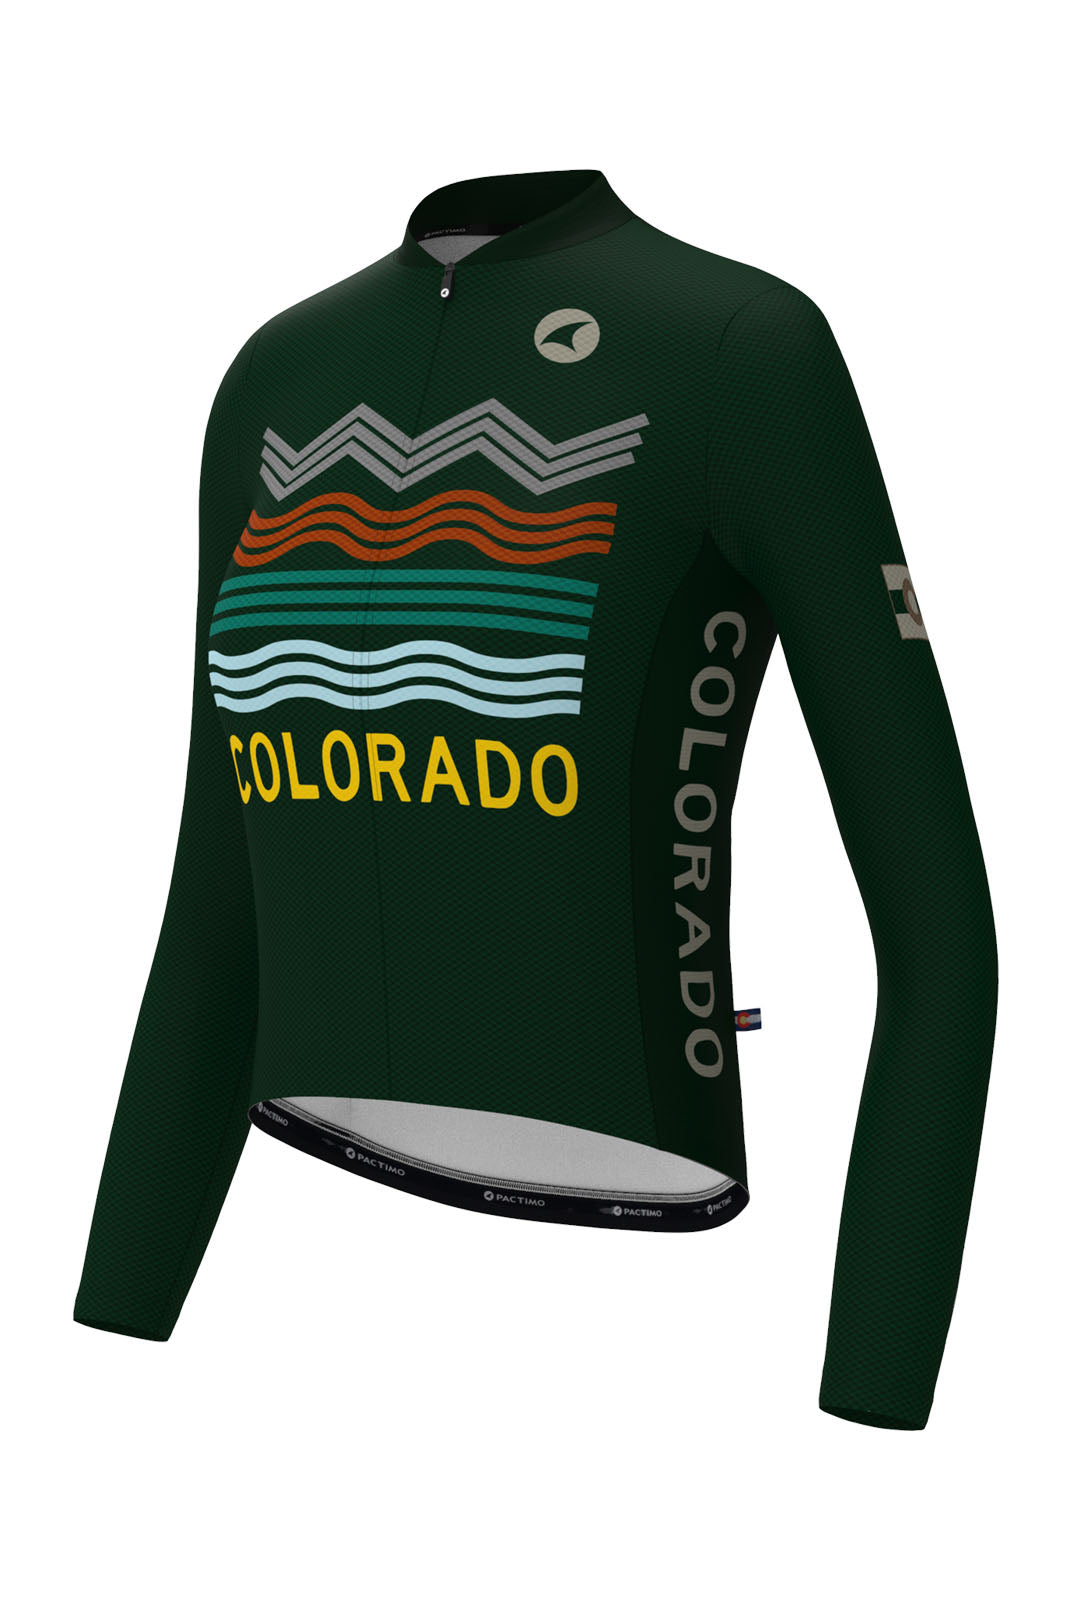 Women's Navy Blue Colorado Long Sleeve Cycling Jersey - Front View